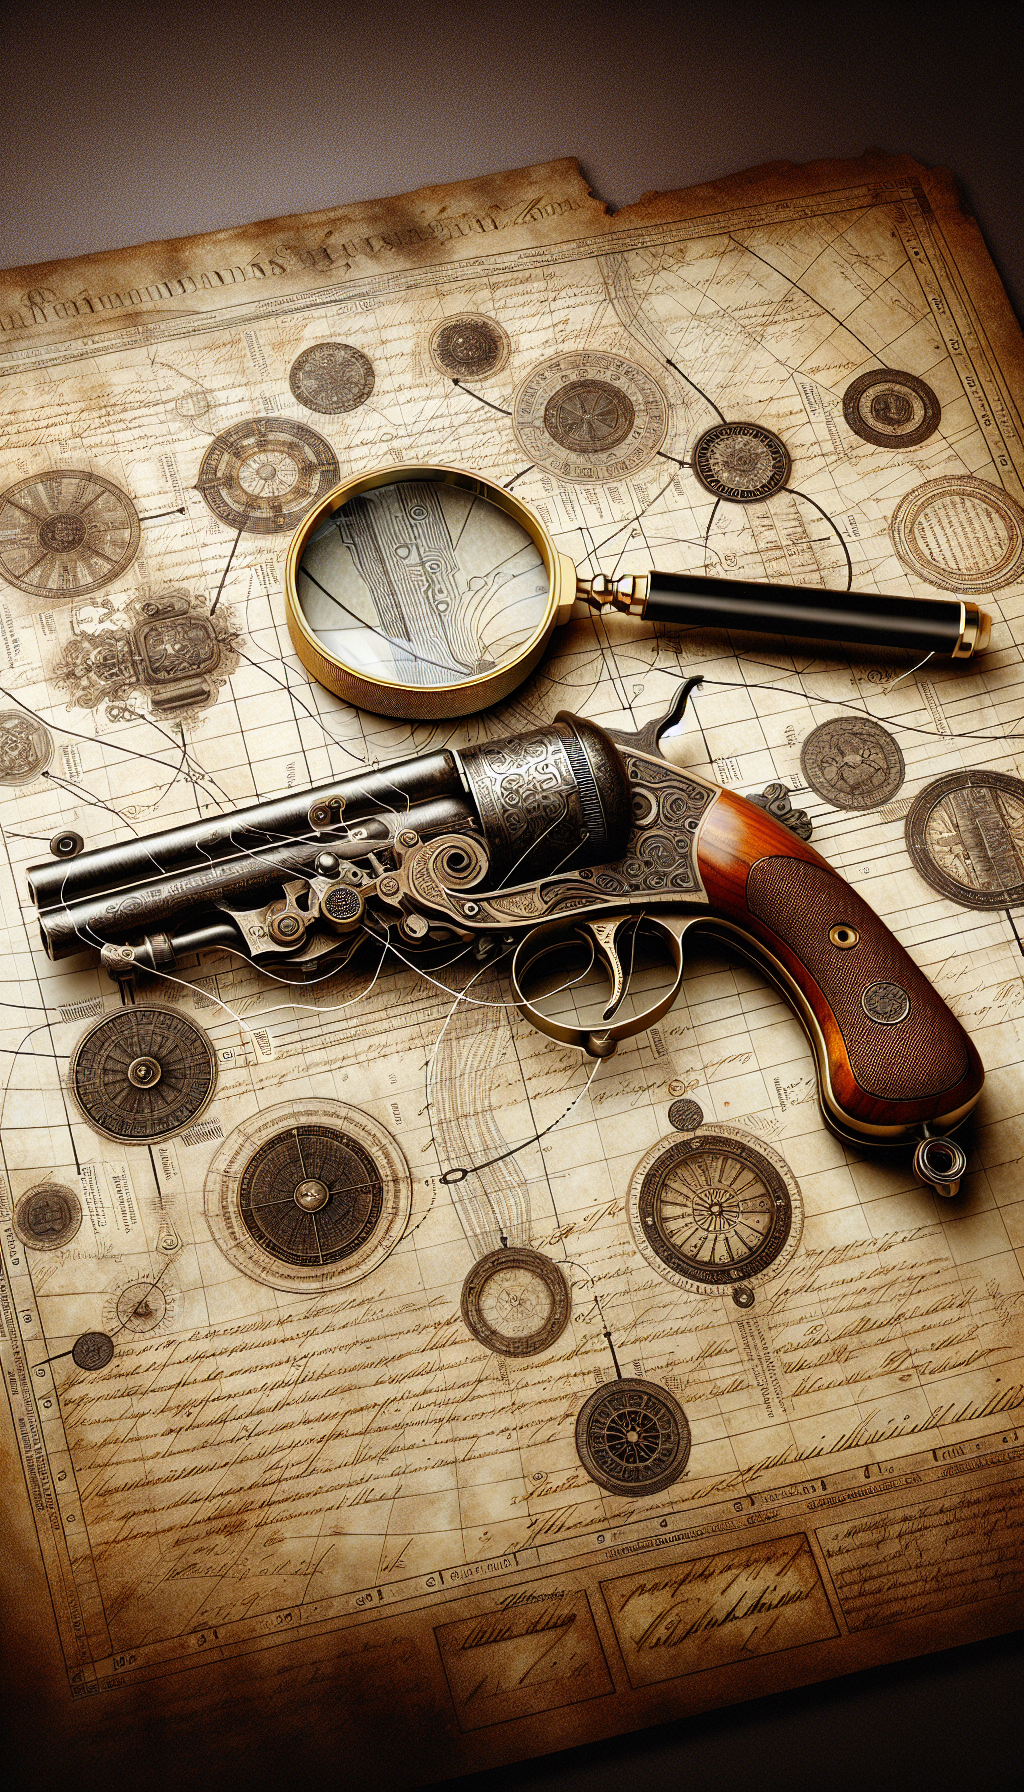 An intricate illustration depicts a magnifying glass hovering over an antique pistol aligned on a map with notable makers' marks and timestamps. Each identifiable feature of the pistol—scrollwork, patina, hammer—is tied with delicate, dotted lines to archival documents and authentication seals, visually connecting the process of provenance verification within the artful complexities of pistol identification.